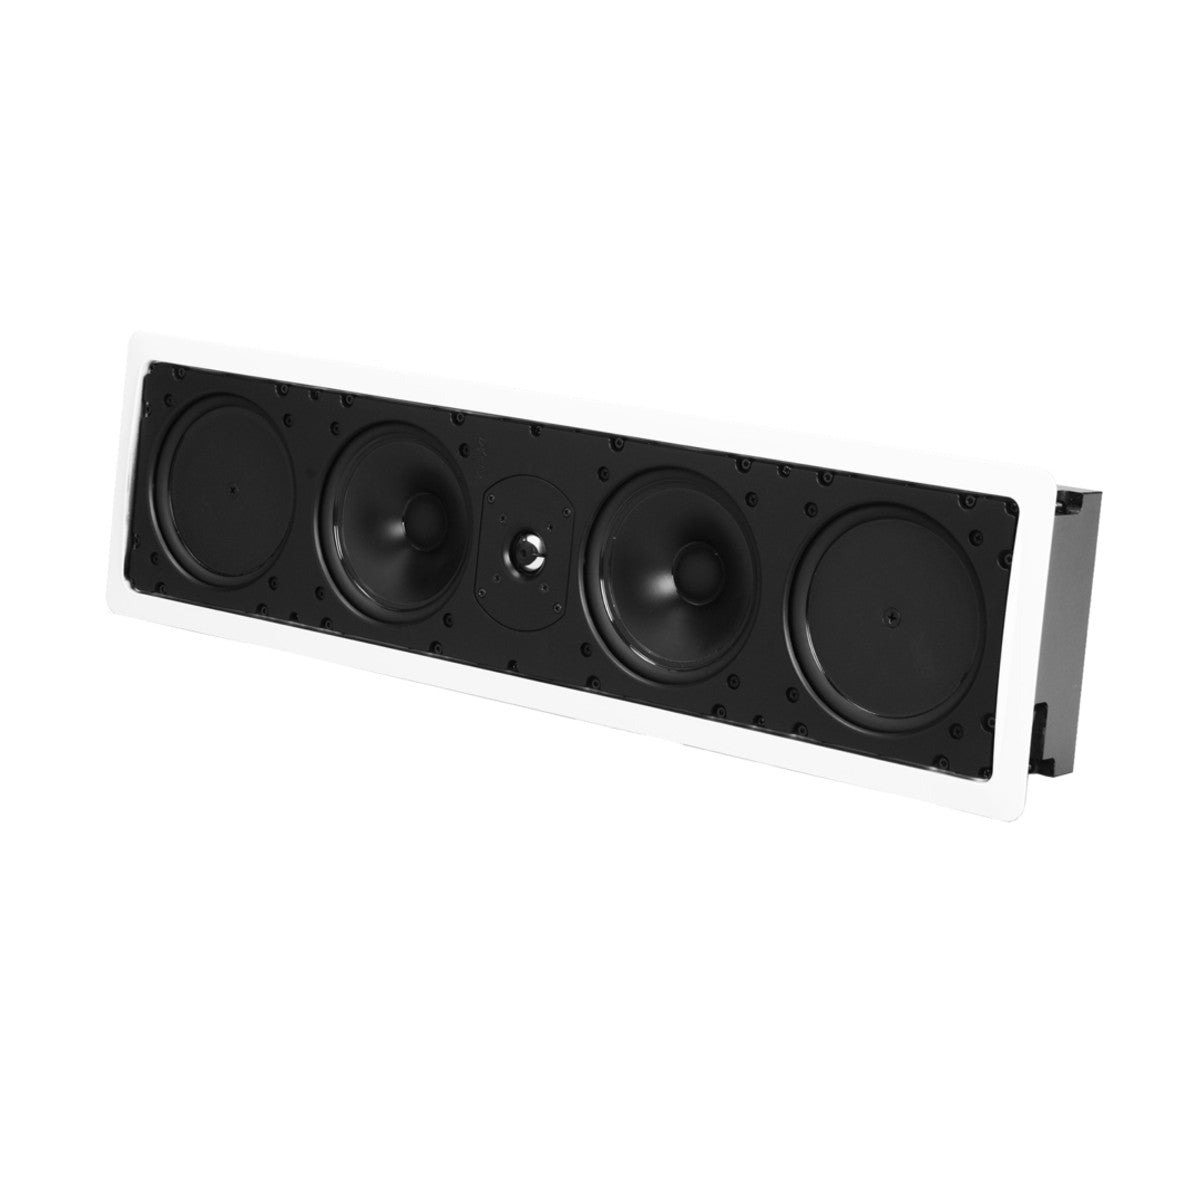 Definitive Technology UIW RLS II 6.5" In-Wall Reference Line Source Speaker - Ooberpad